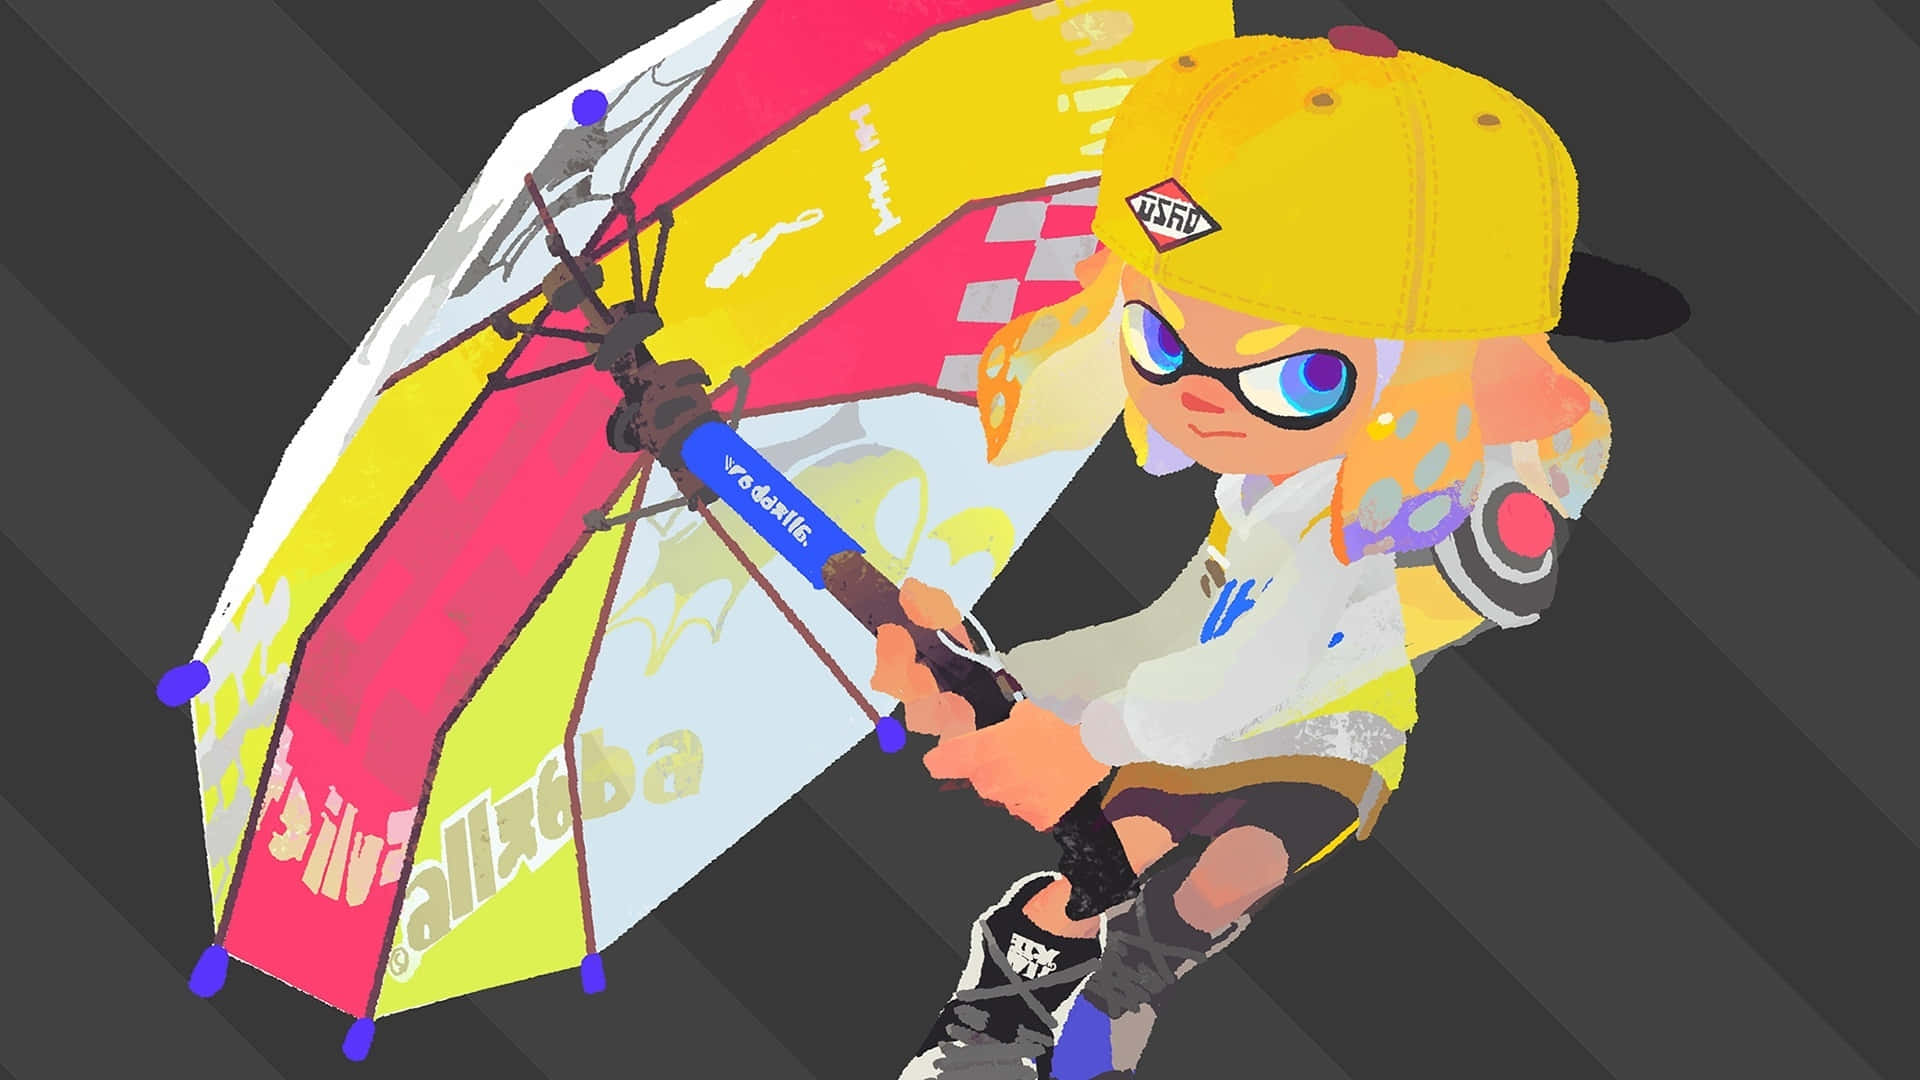 A bold and daring team of Inklings take on the challenge of Splatoon!